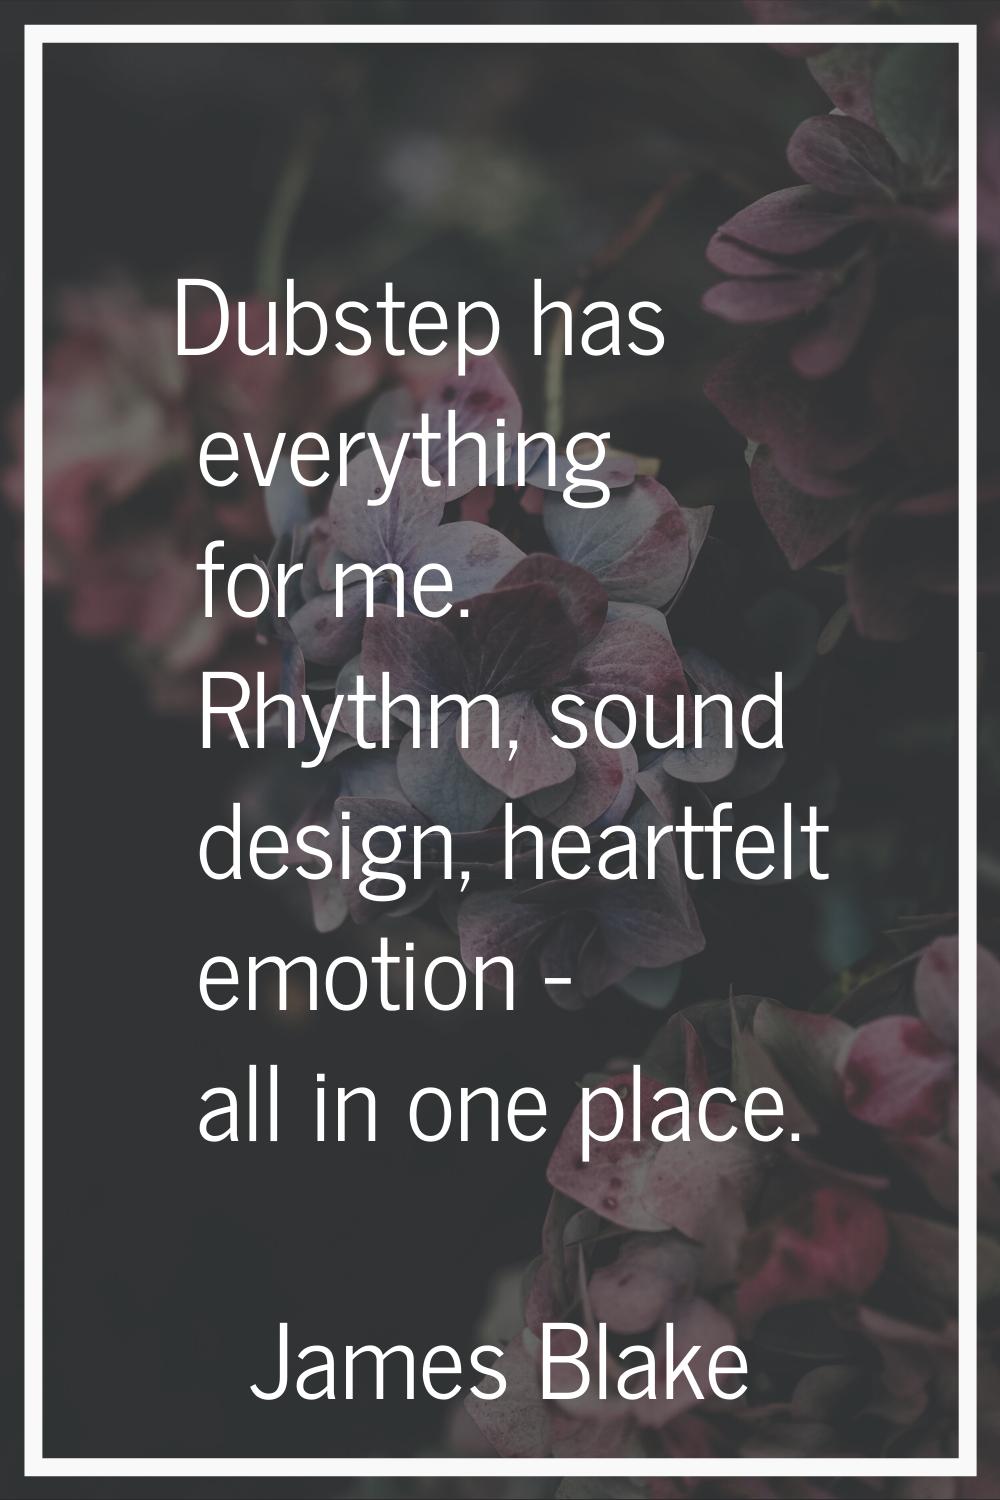 Dubstep has everything for me. Rhythm, sound design, heartfelt emotion - all in one place.